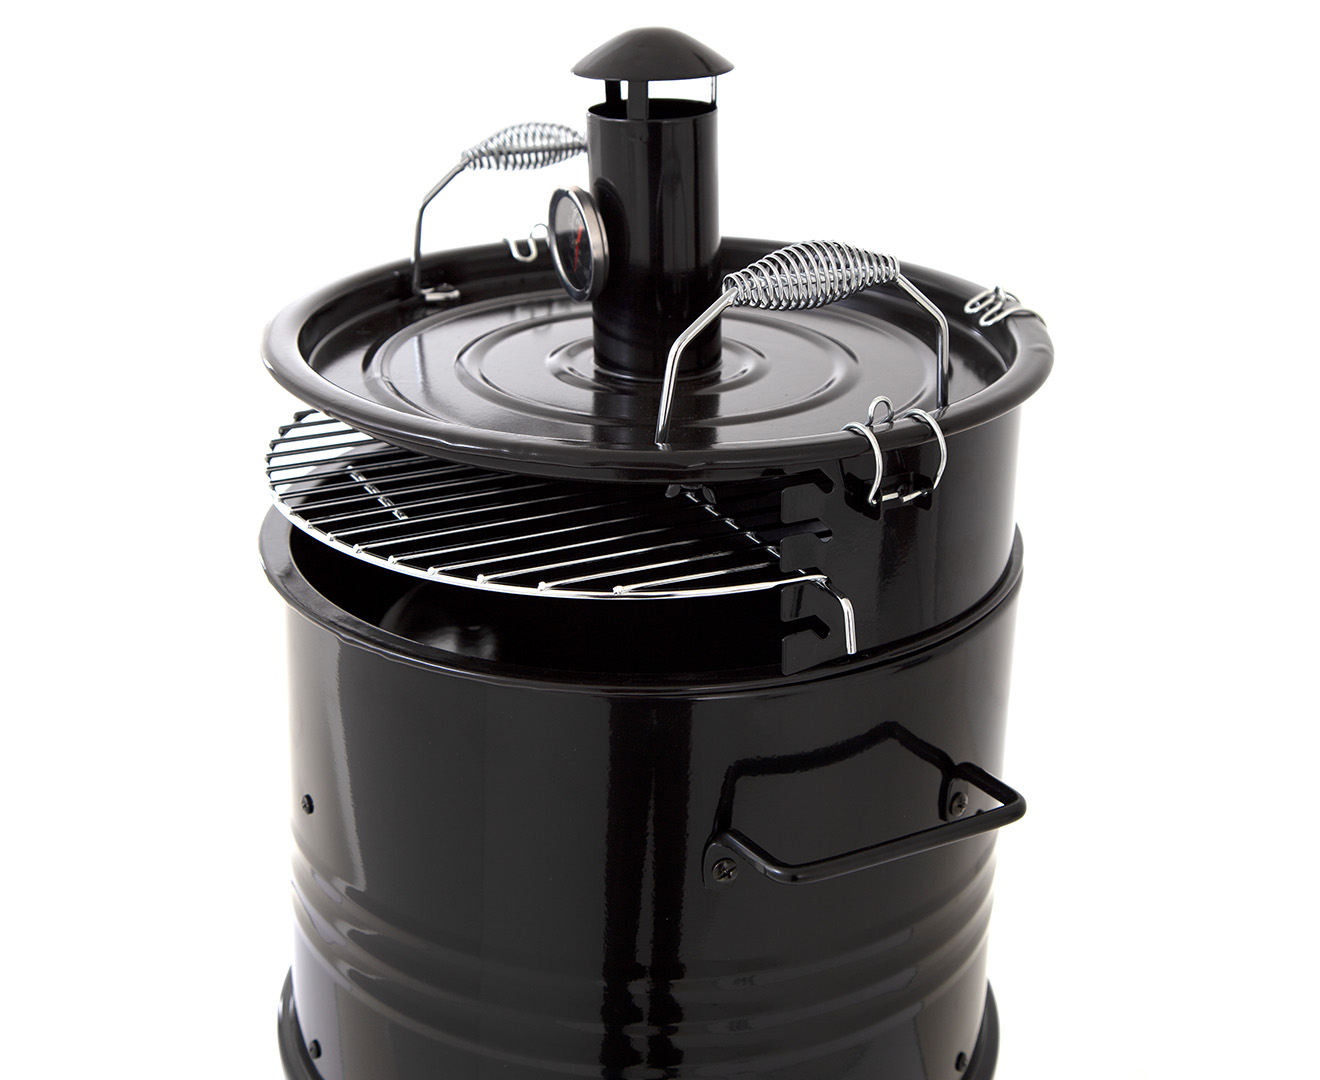 Charmate Barrel Shape Charcoal Grill 4-in-1 Smoker and BBQ | Catch.com.au